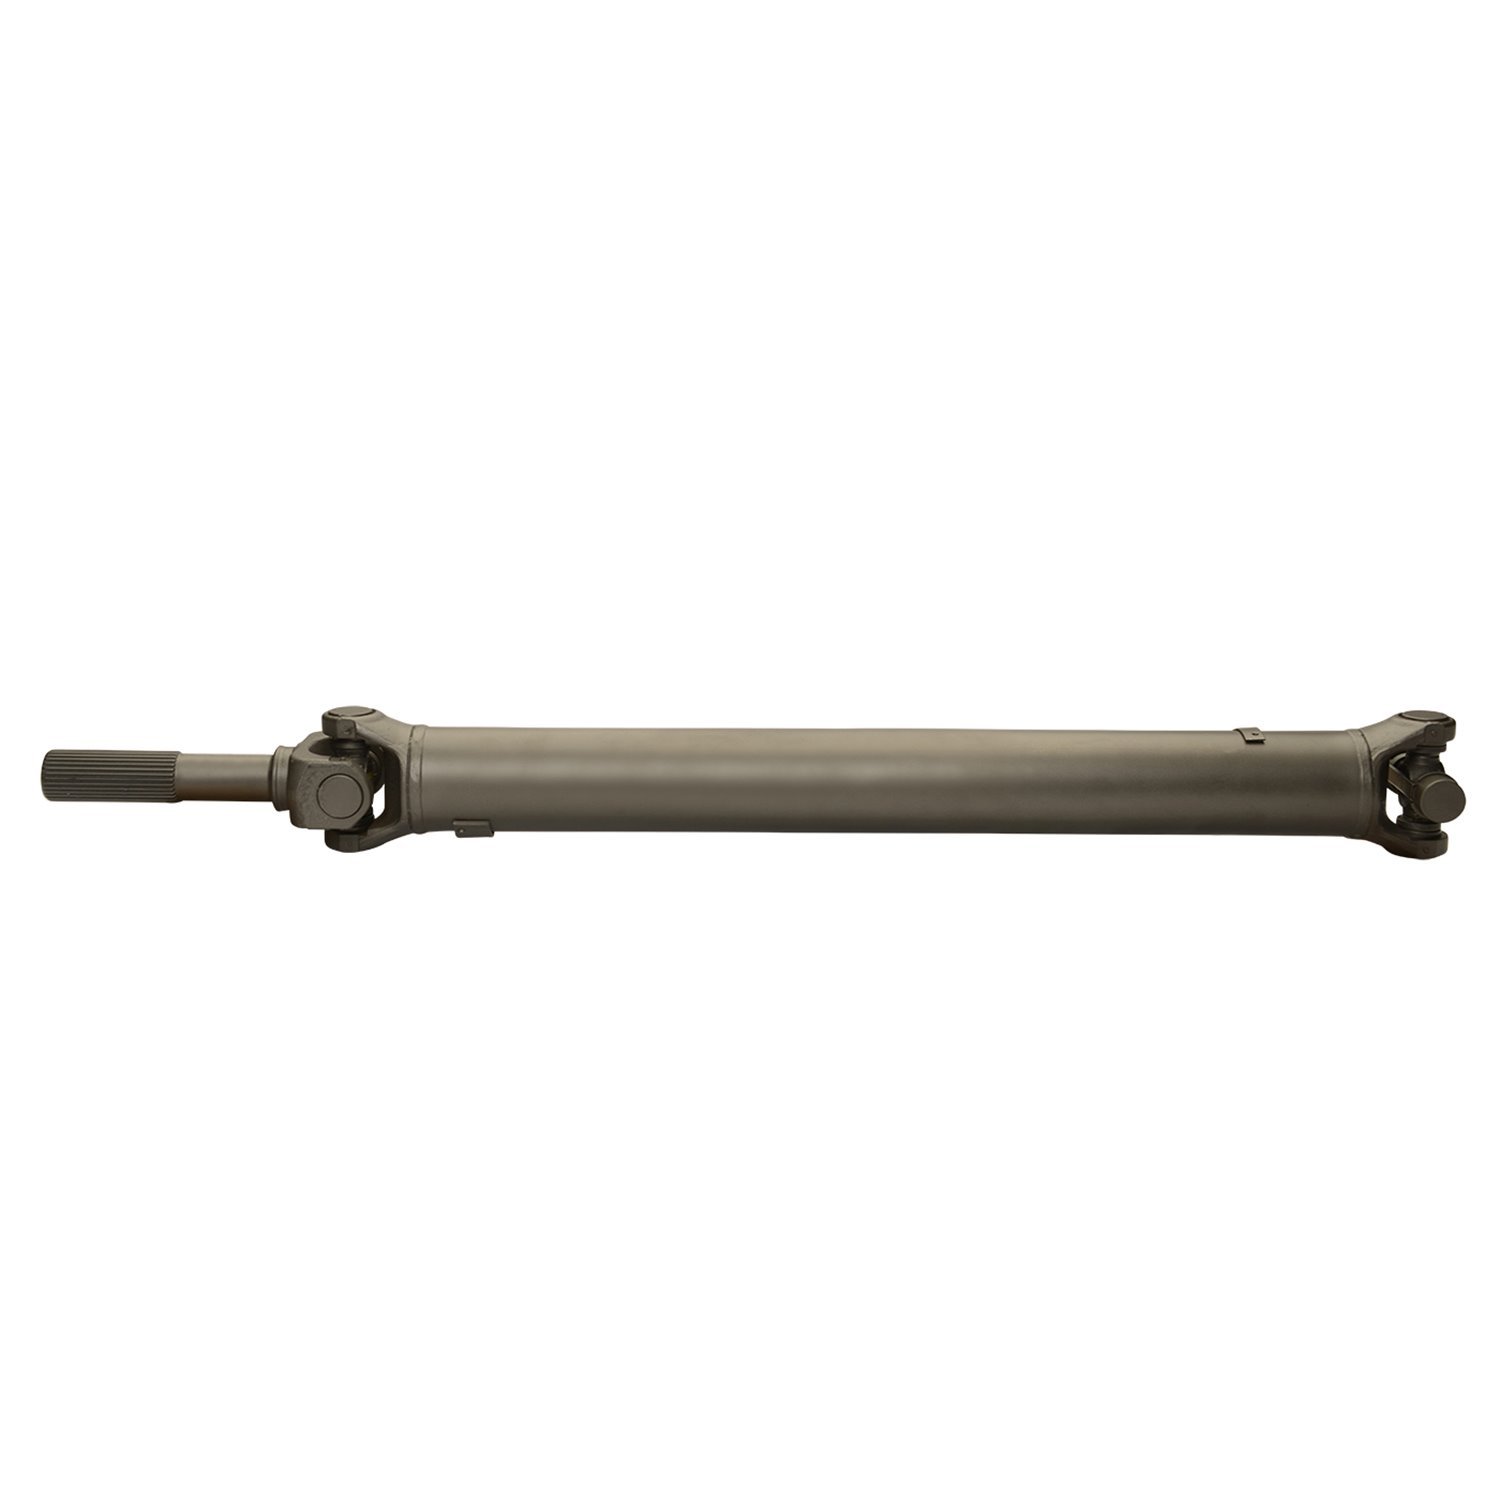 USA Standard ZDS9518 Front Driveshaft, For GM Truck & Suv, 26 in. Weld-To-Weld